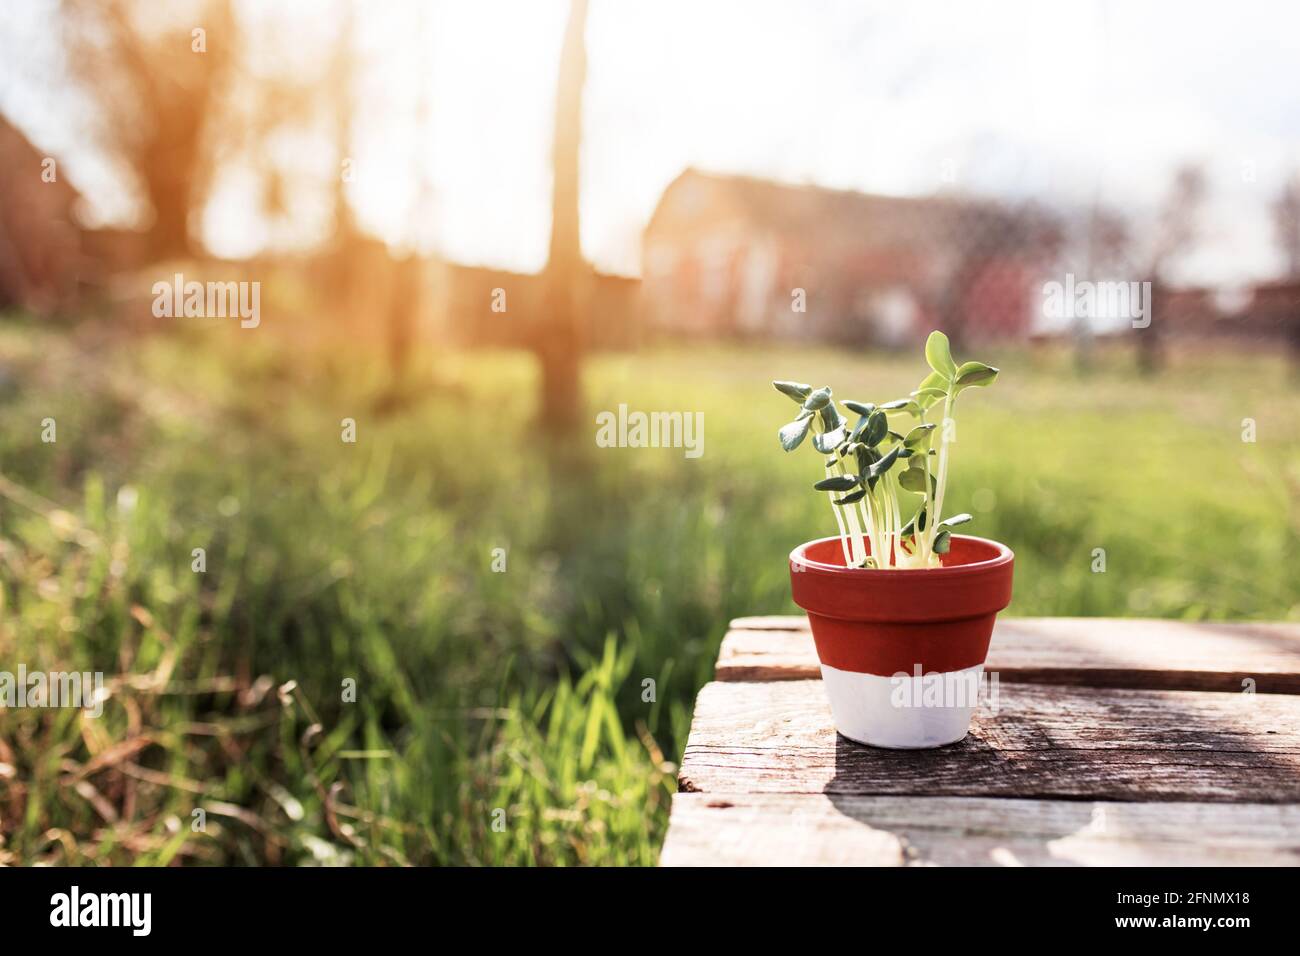 Gardening hobby concept with green vegetable cucumber seedlings in ceramic pot on the old wooden table in the garden with blurred sunlight background Stock Photo